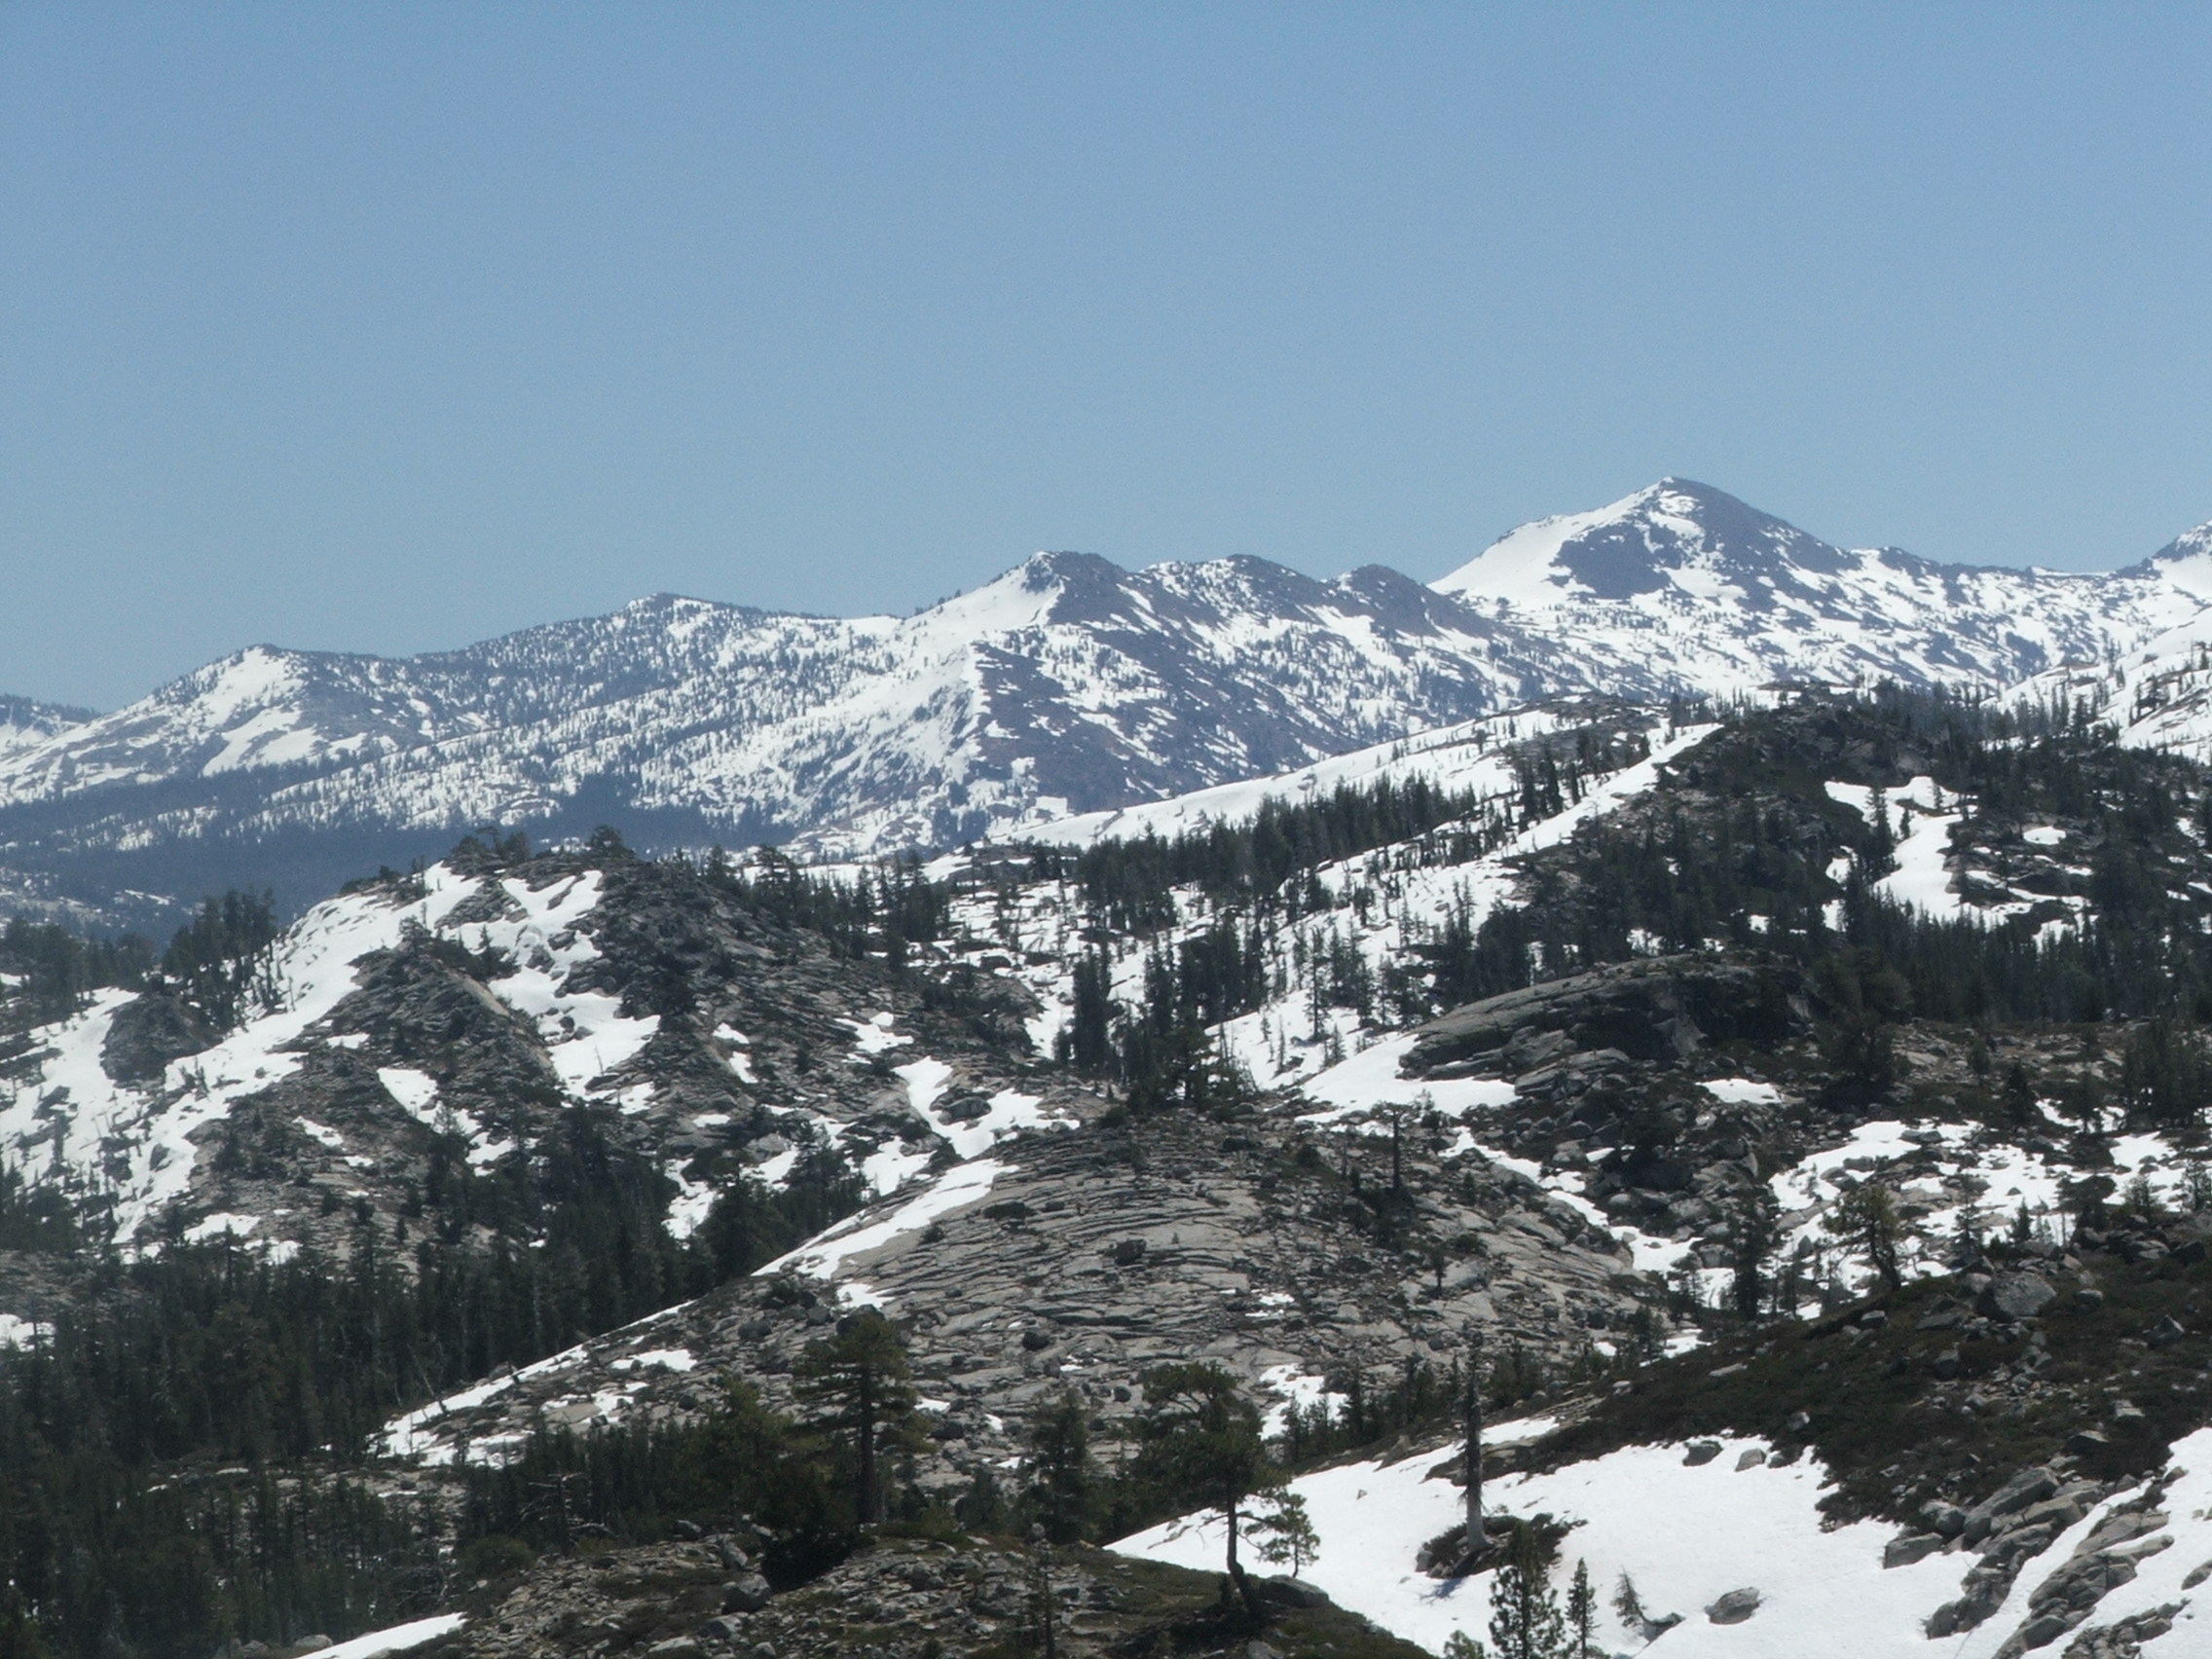 Desolation Wilderness to the south